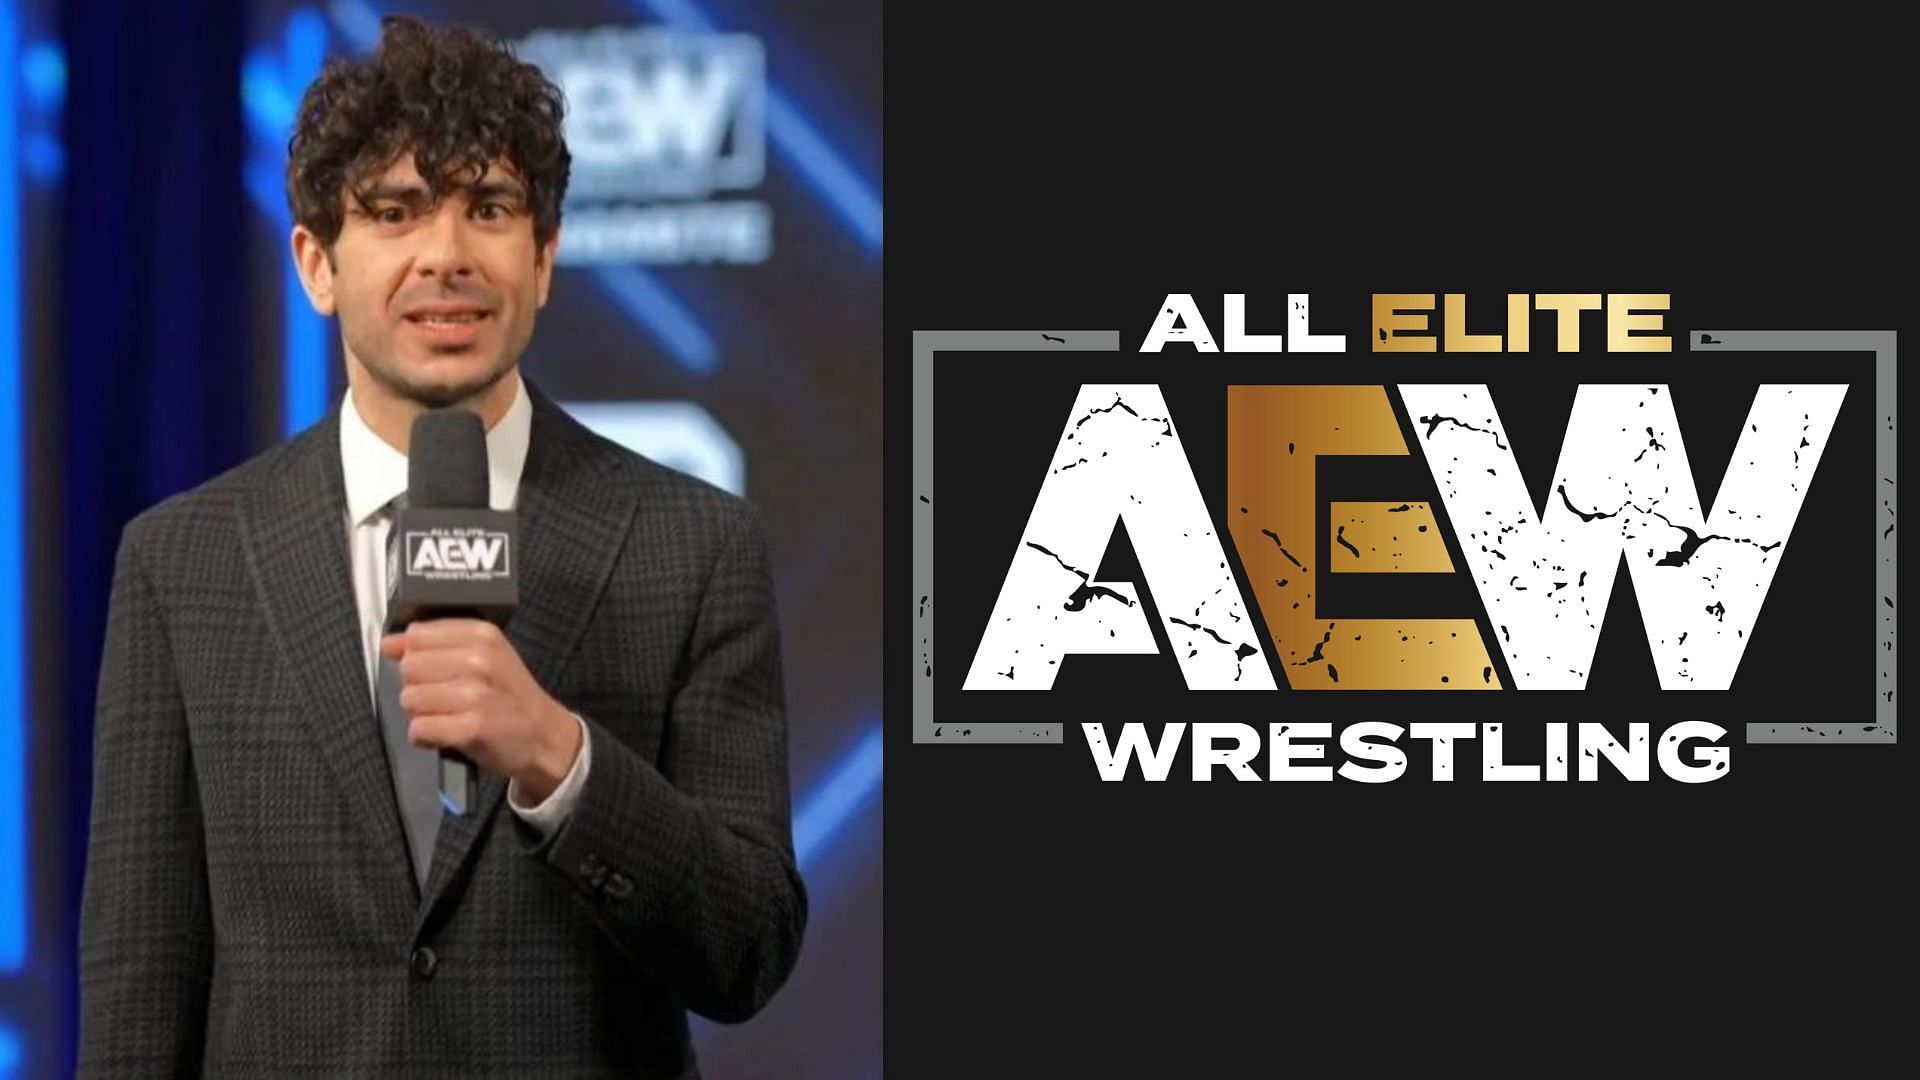 New AEW hire officially revealed